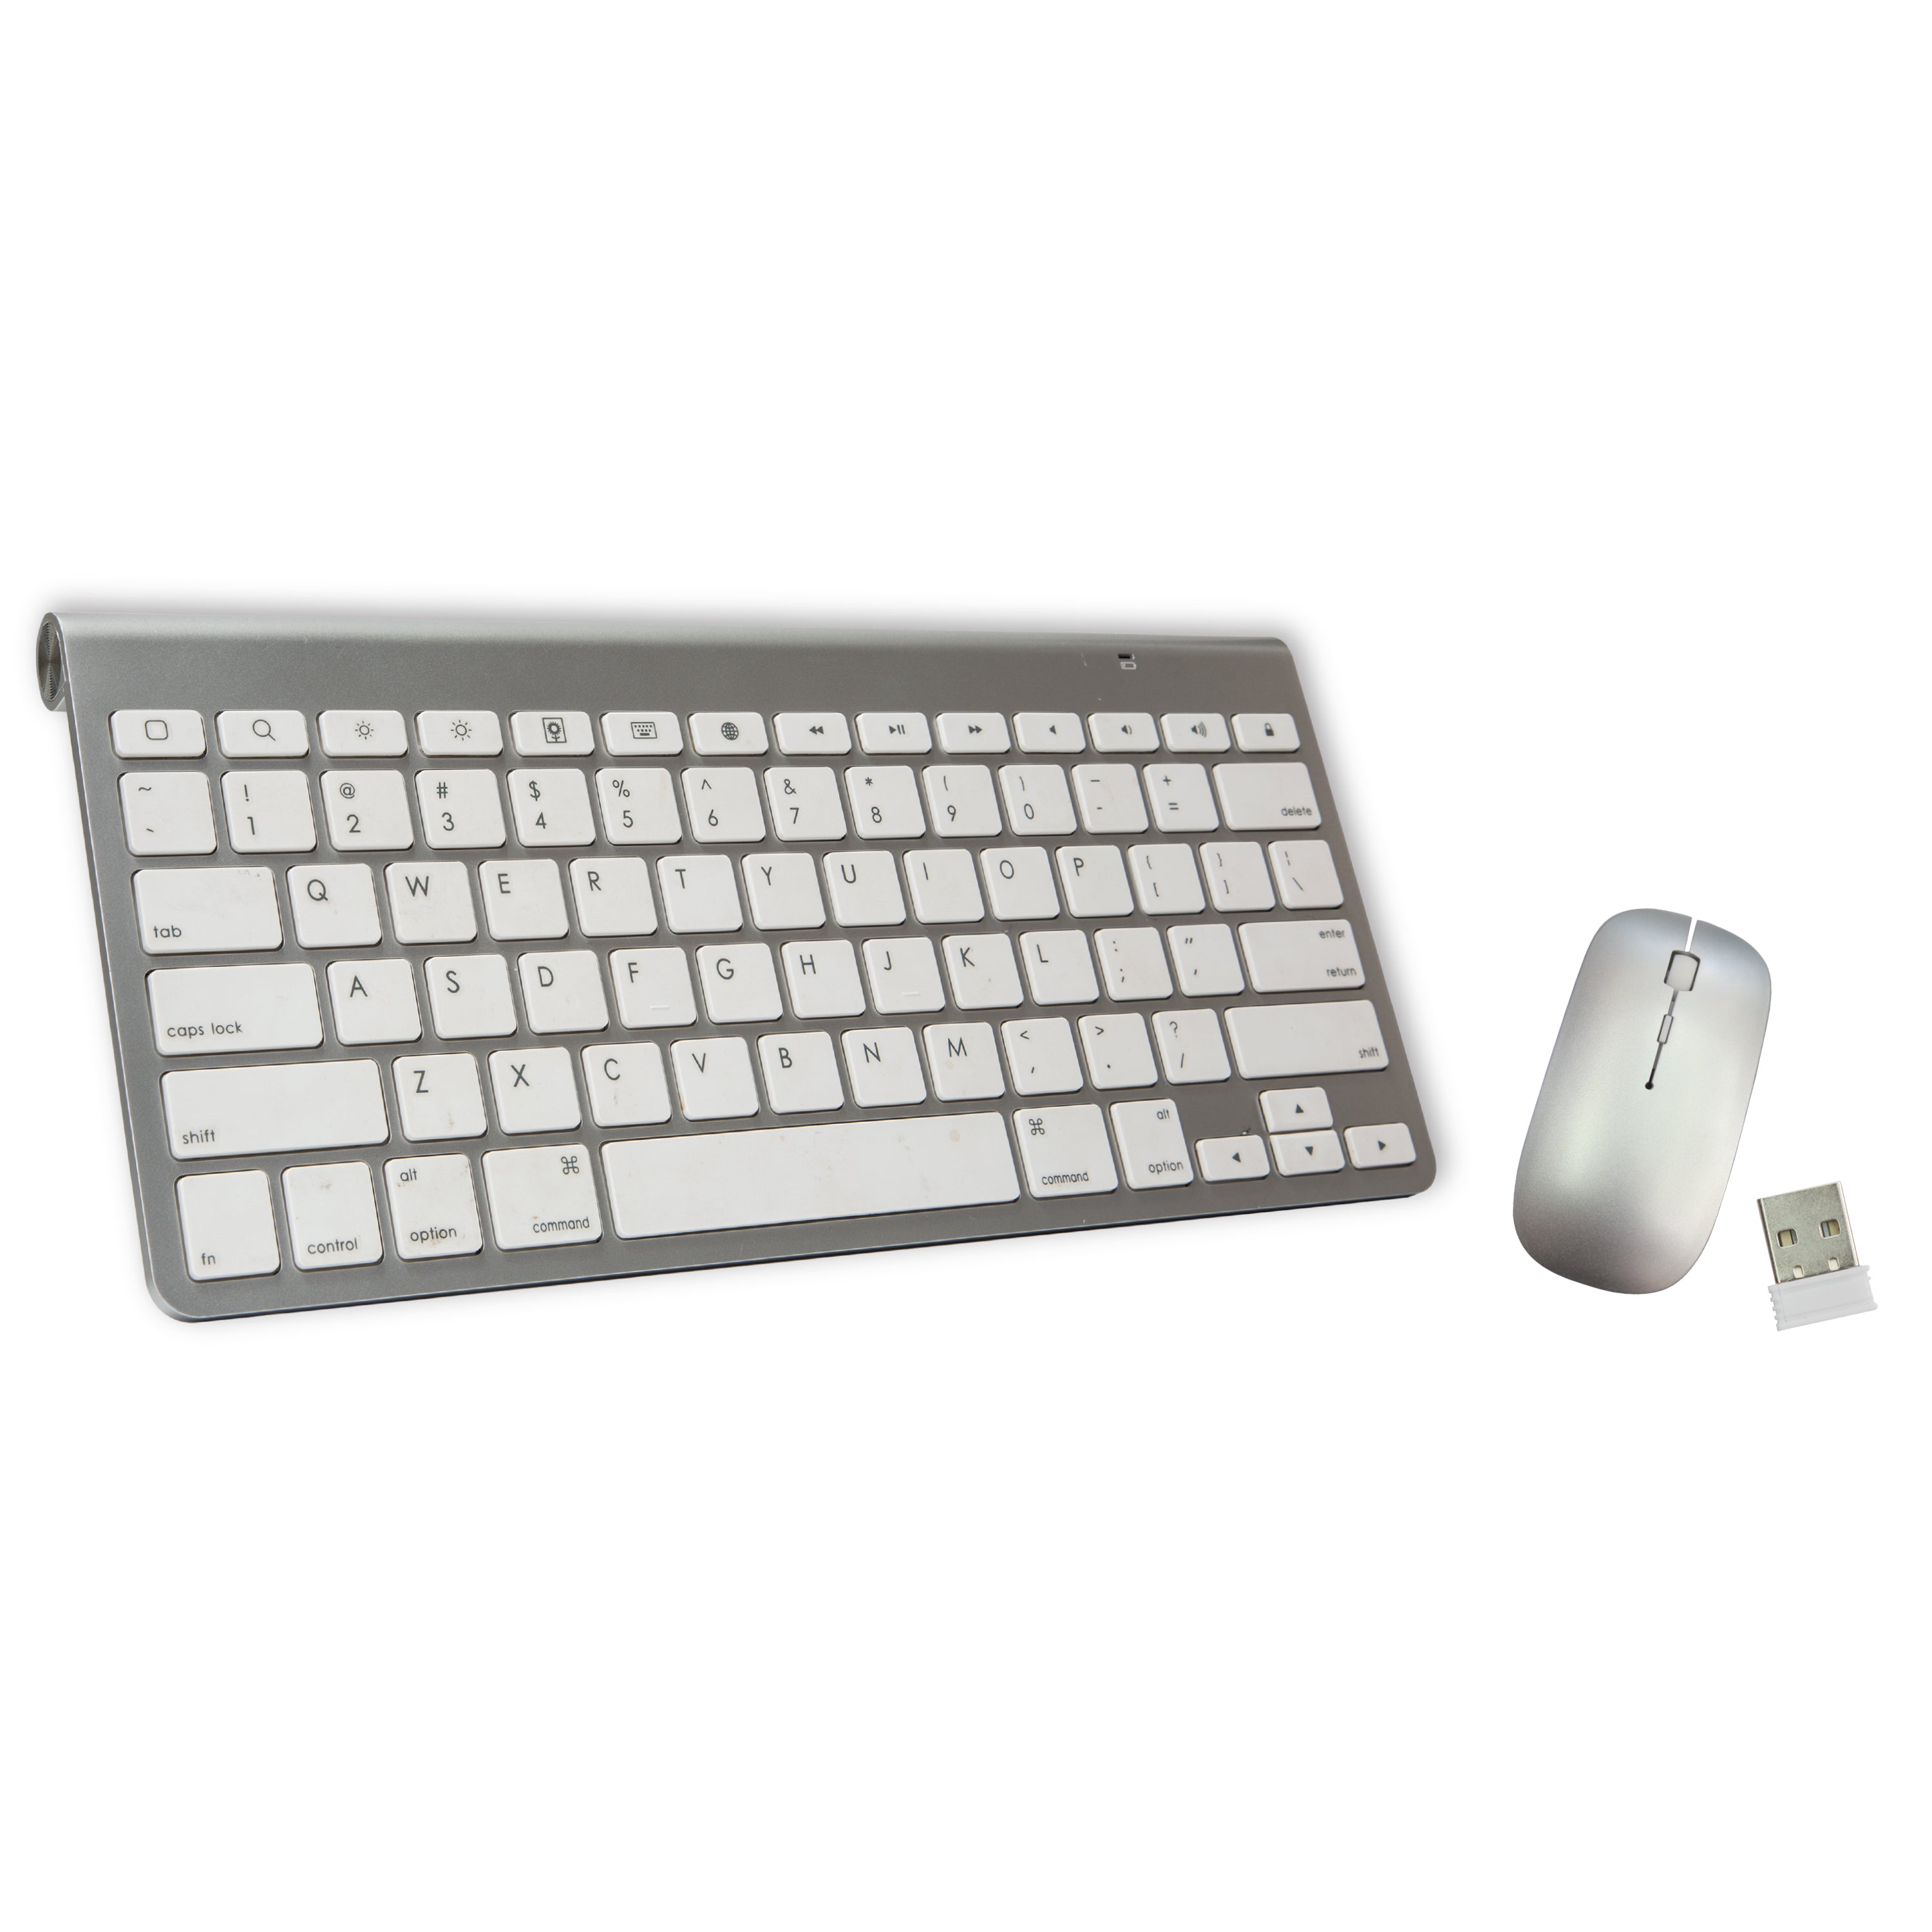 Supersonic 2.4GHz Ultra-Slim Wireless Keyboard/Mouse Combo